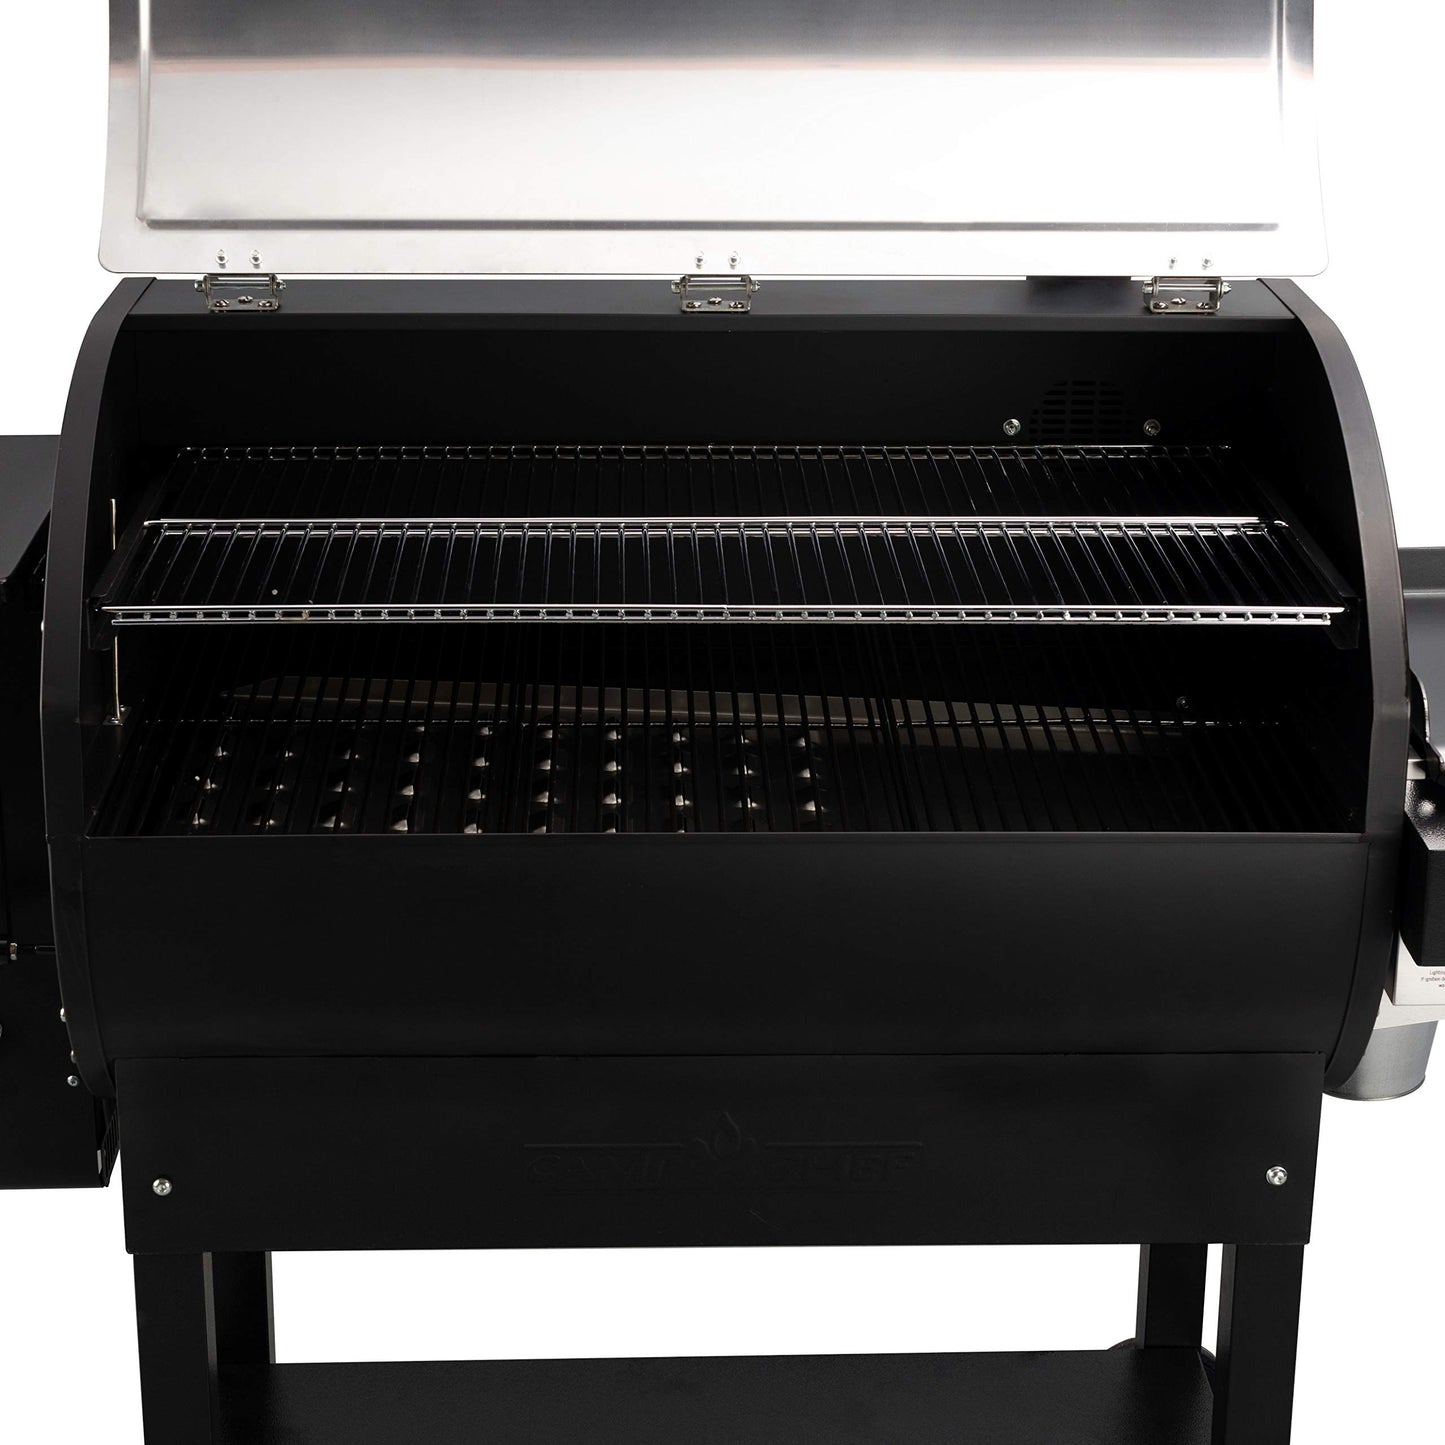 Camp Chef 36" Woodwind WiFi Pellet Grill & Smoker, Stainless Steel